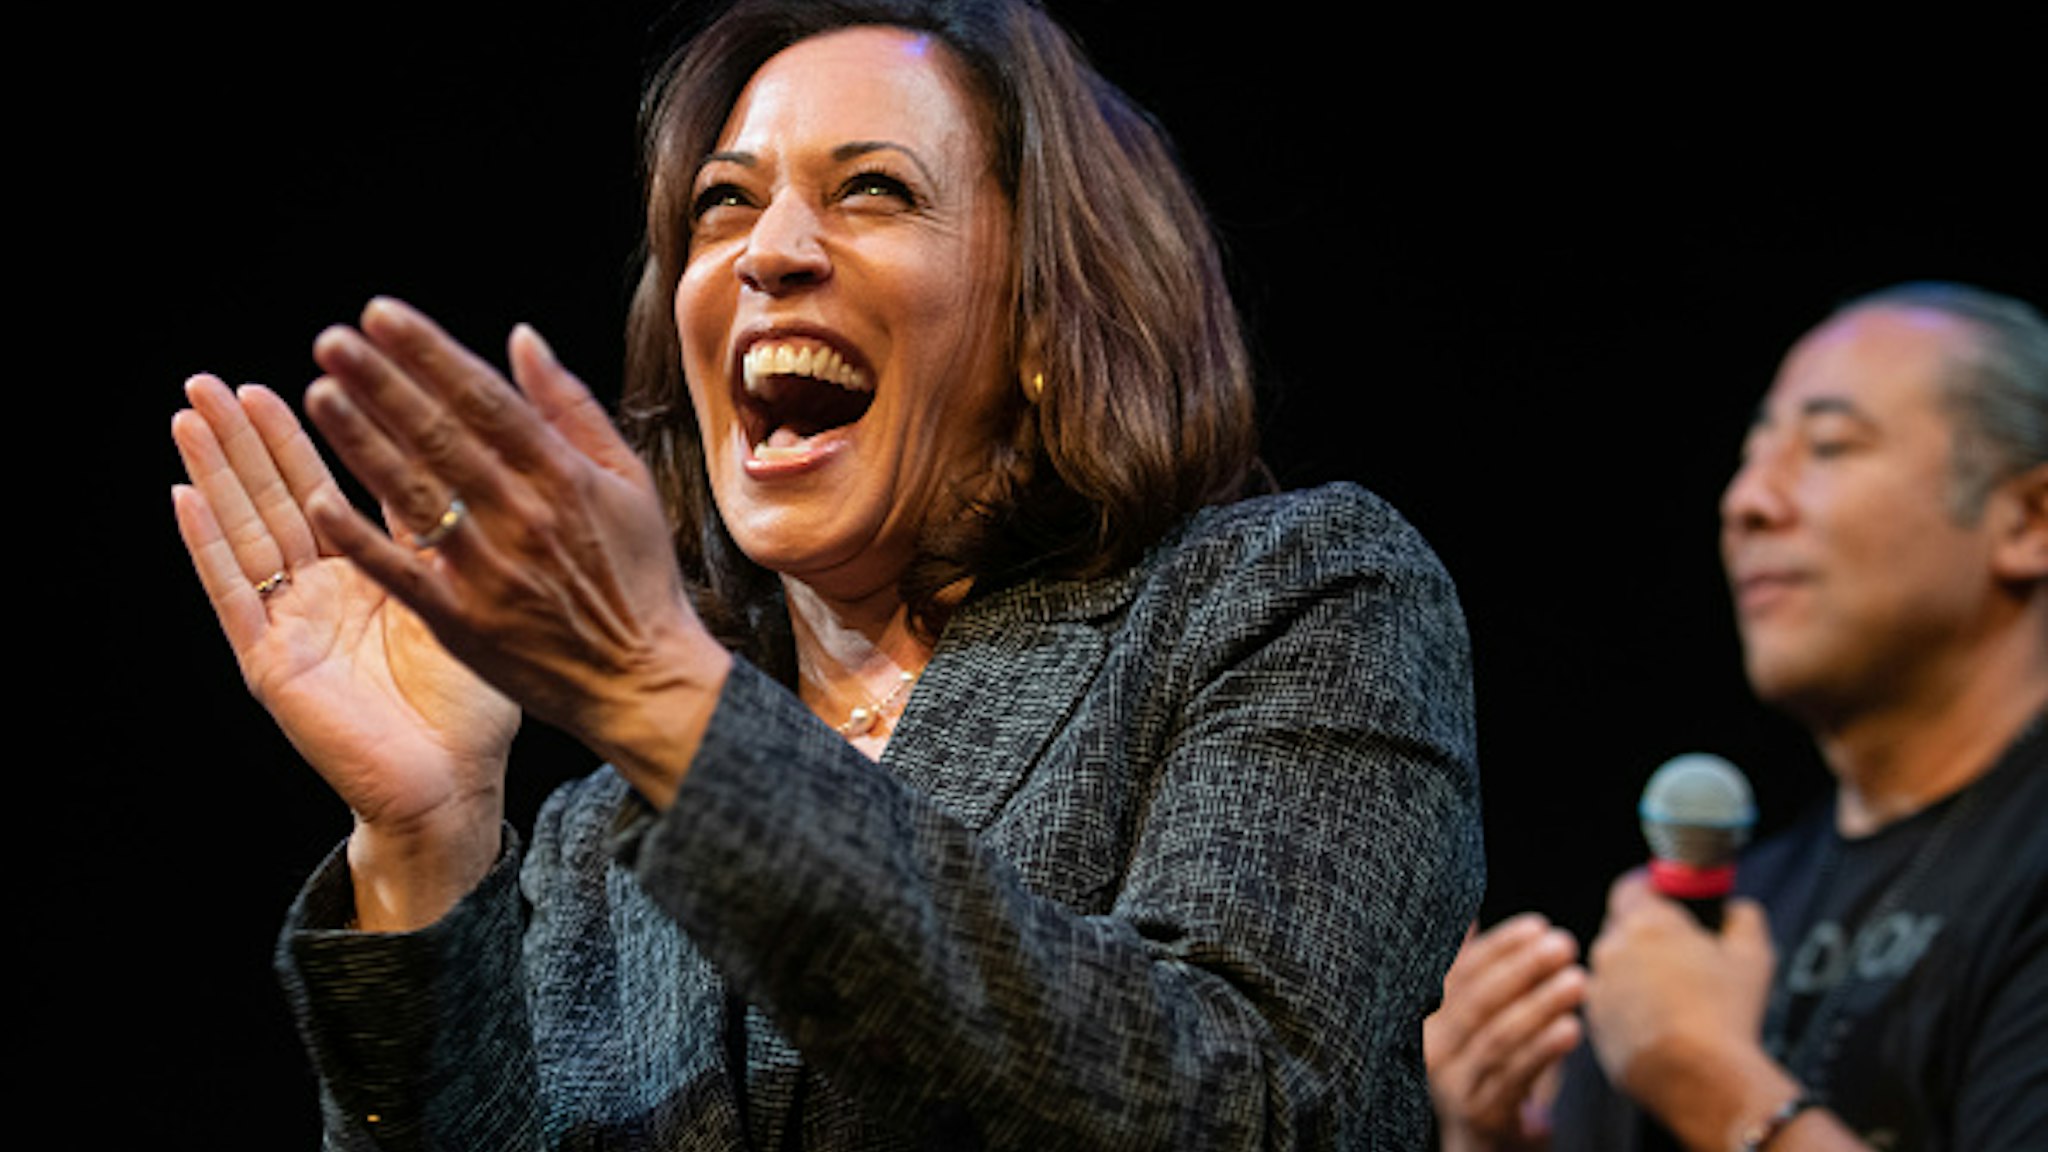 Senator Kamala Harris, a Democrat from California and 2020 presidential candidate, reacts during a Gun Safety Round table in Seattle, Washington, U.S., on Friday, Sept. 27, 2019. Kamala's gun safety agenda includes universal background checks, an assault weapons ban, and the repeal of the NRA's corporate gun manufacturer immunity shield.